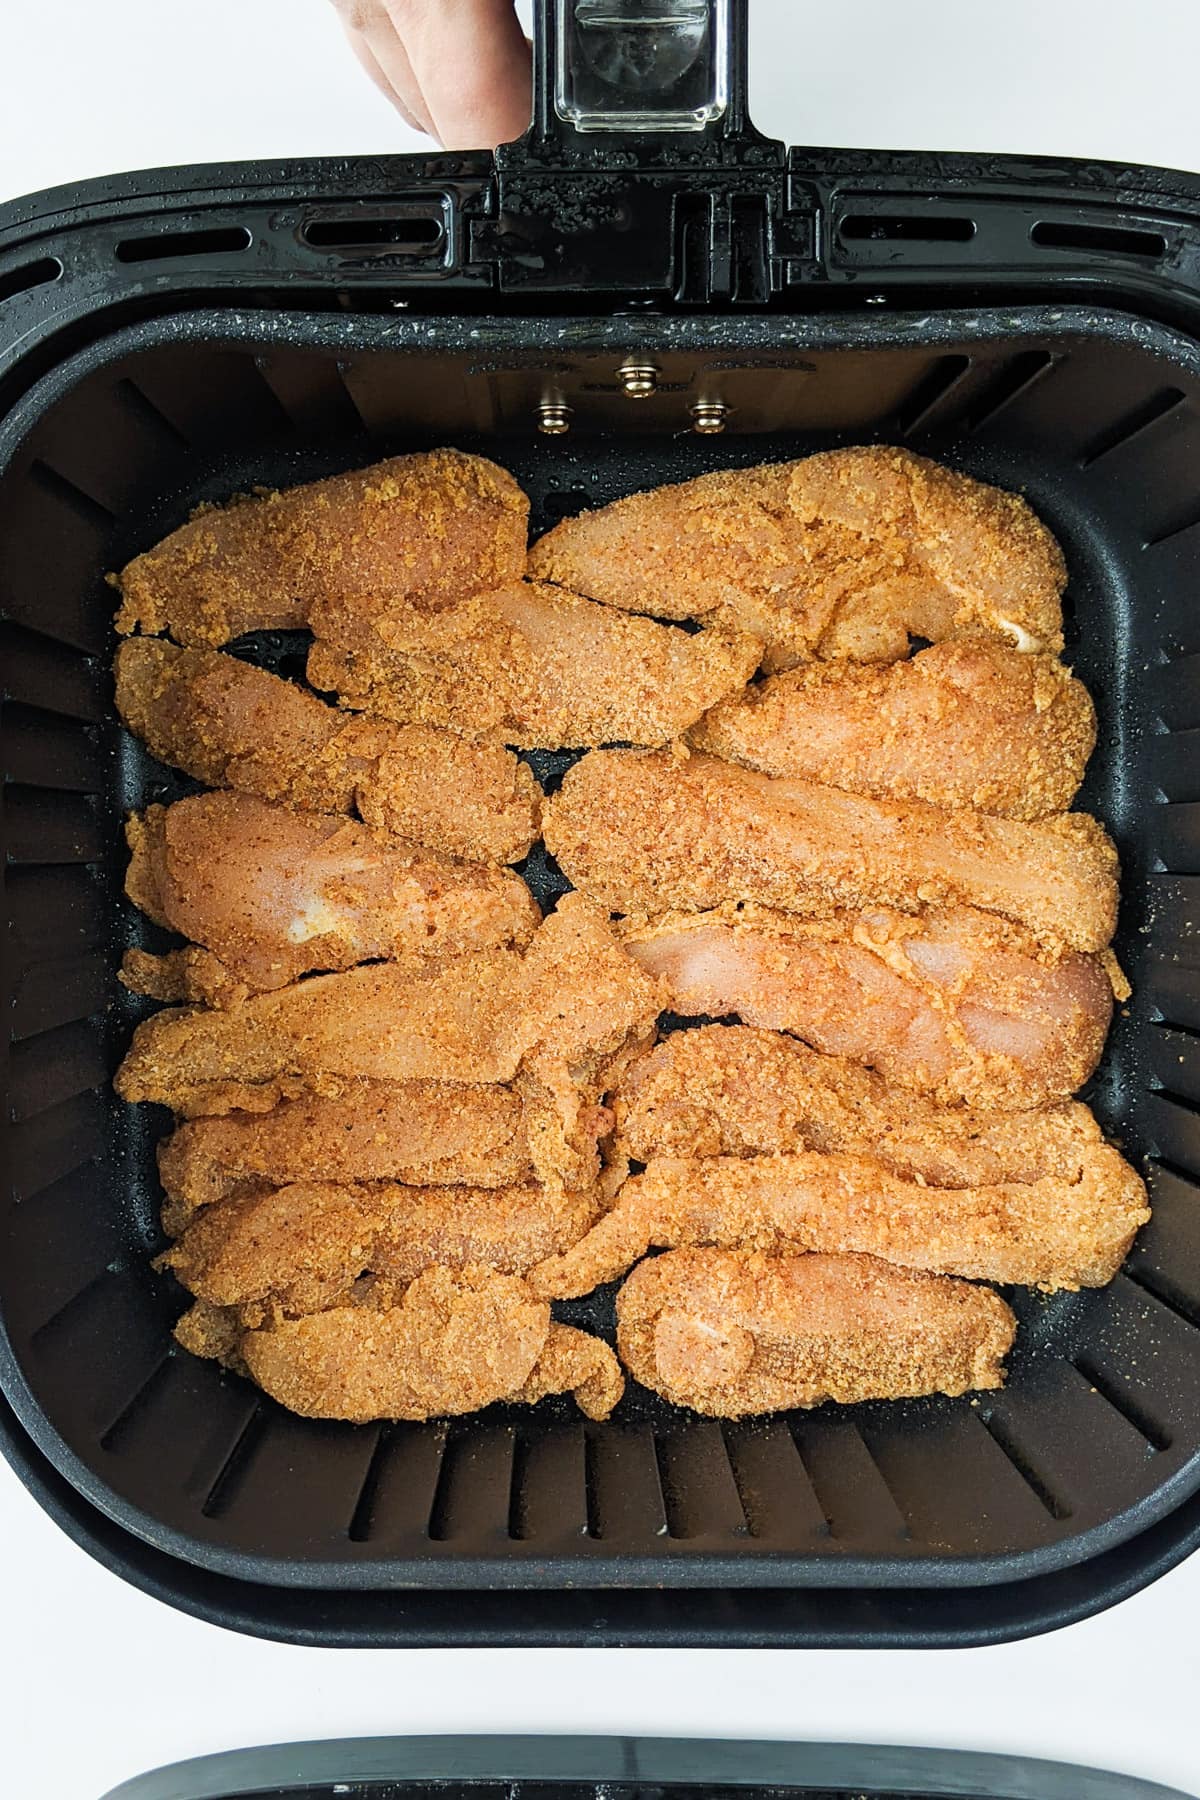 Chicken strips coated with bread crumbs in the air fryer basket.